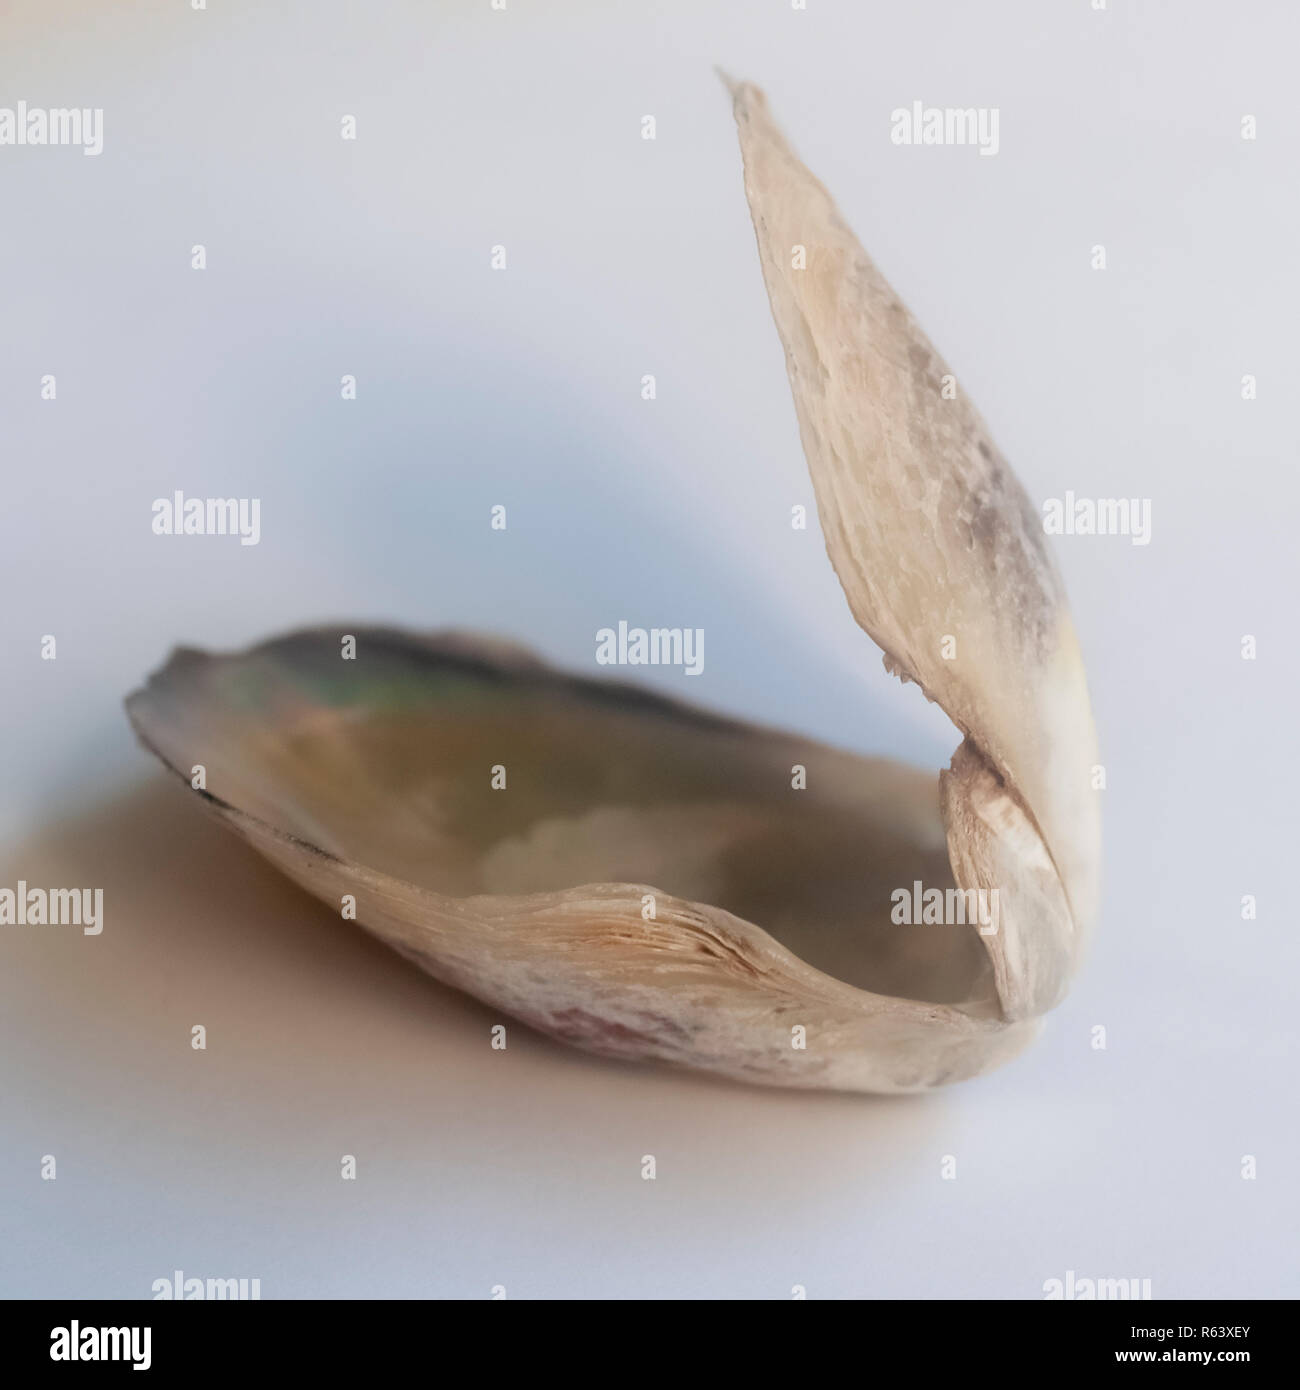 Open double clam shell still held together on white background Stock Photo